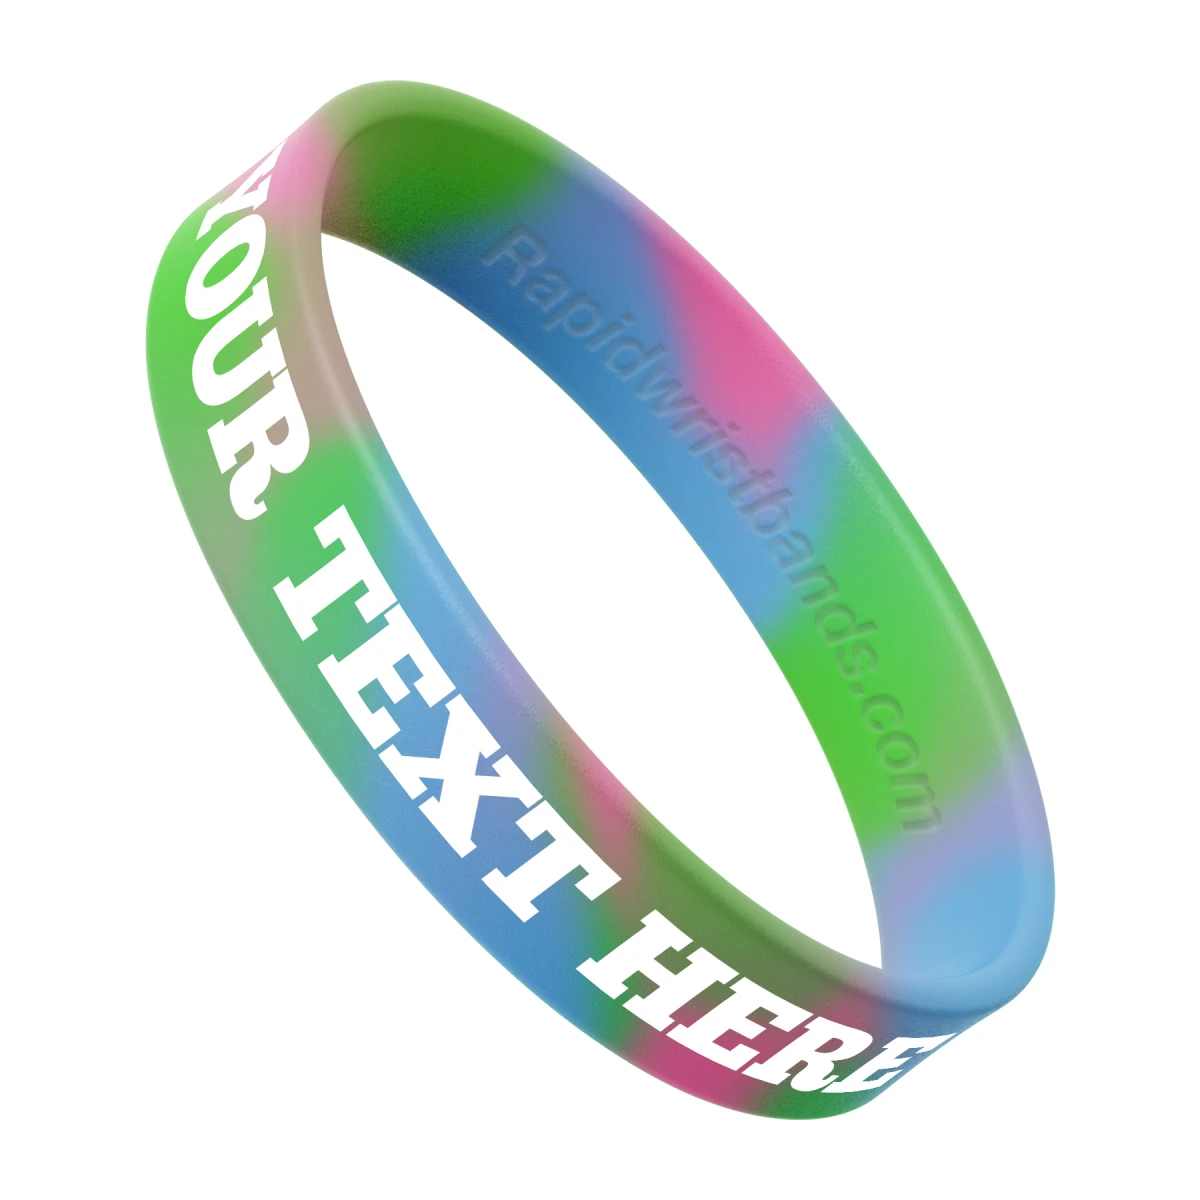 Swirl Light Green/Light Blue/Pink Wristband With Your Text Here Printed In White